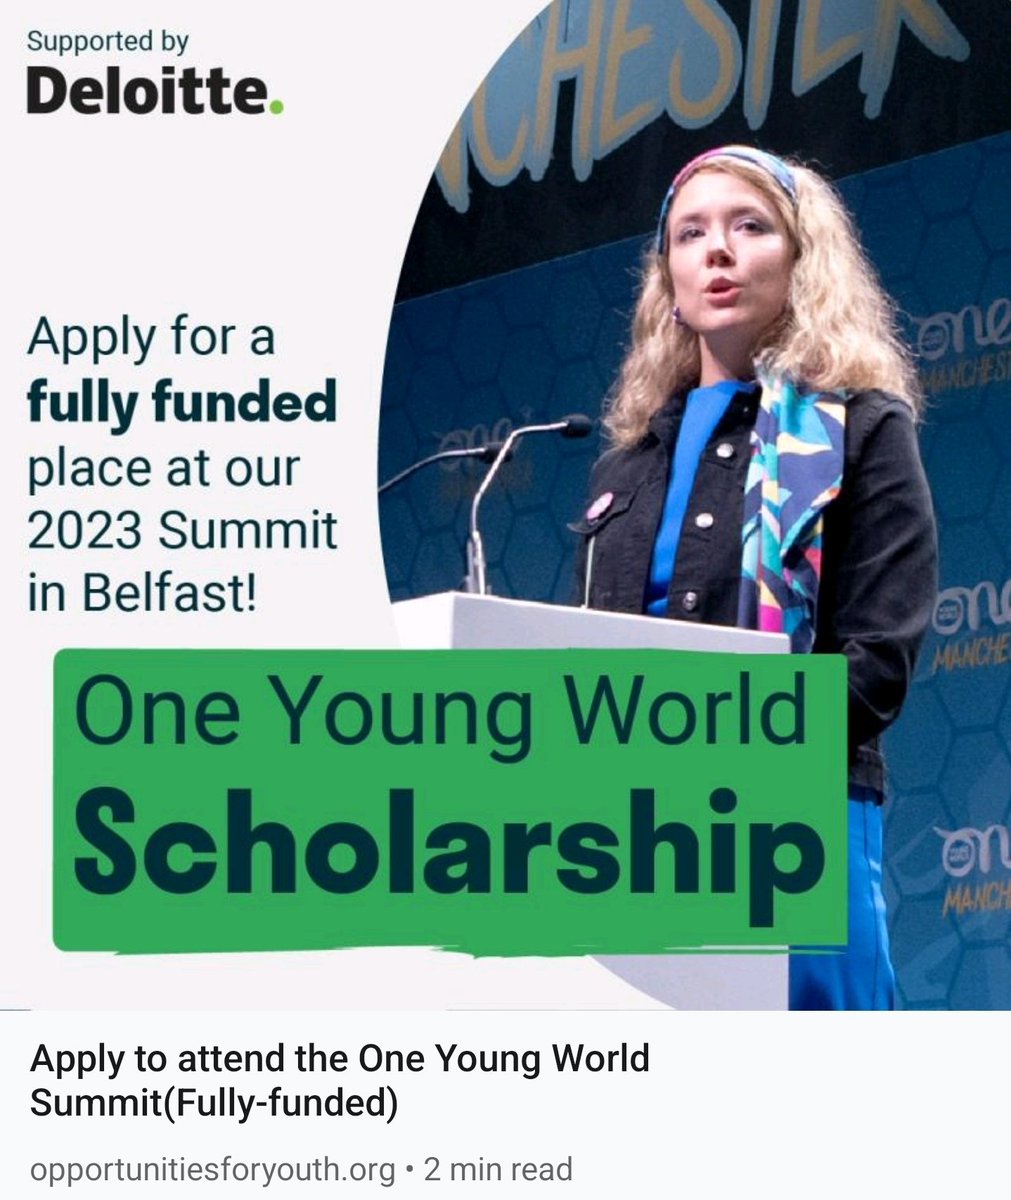 Apply now for a scholarship to attend the One Young World Summit in Belfast. Join global youth leaders in working towards a sustainable future. Benefits include accommodation, travel, meals, etc.

 Link: bit.ly/3lcxOgR

 #YouthLeadership #SustainableFuture #Conference